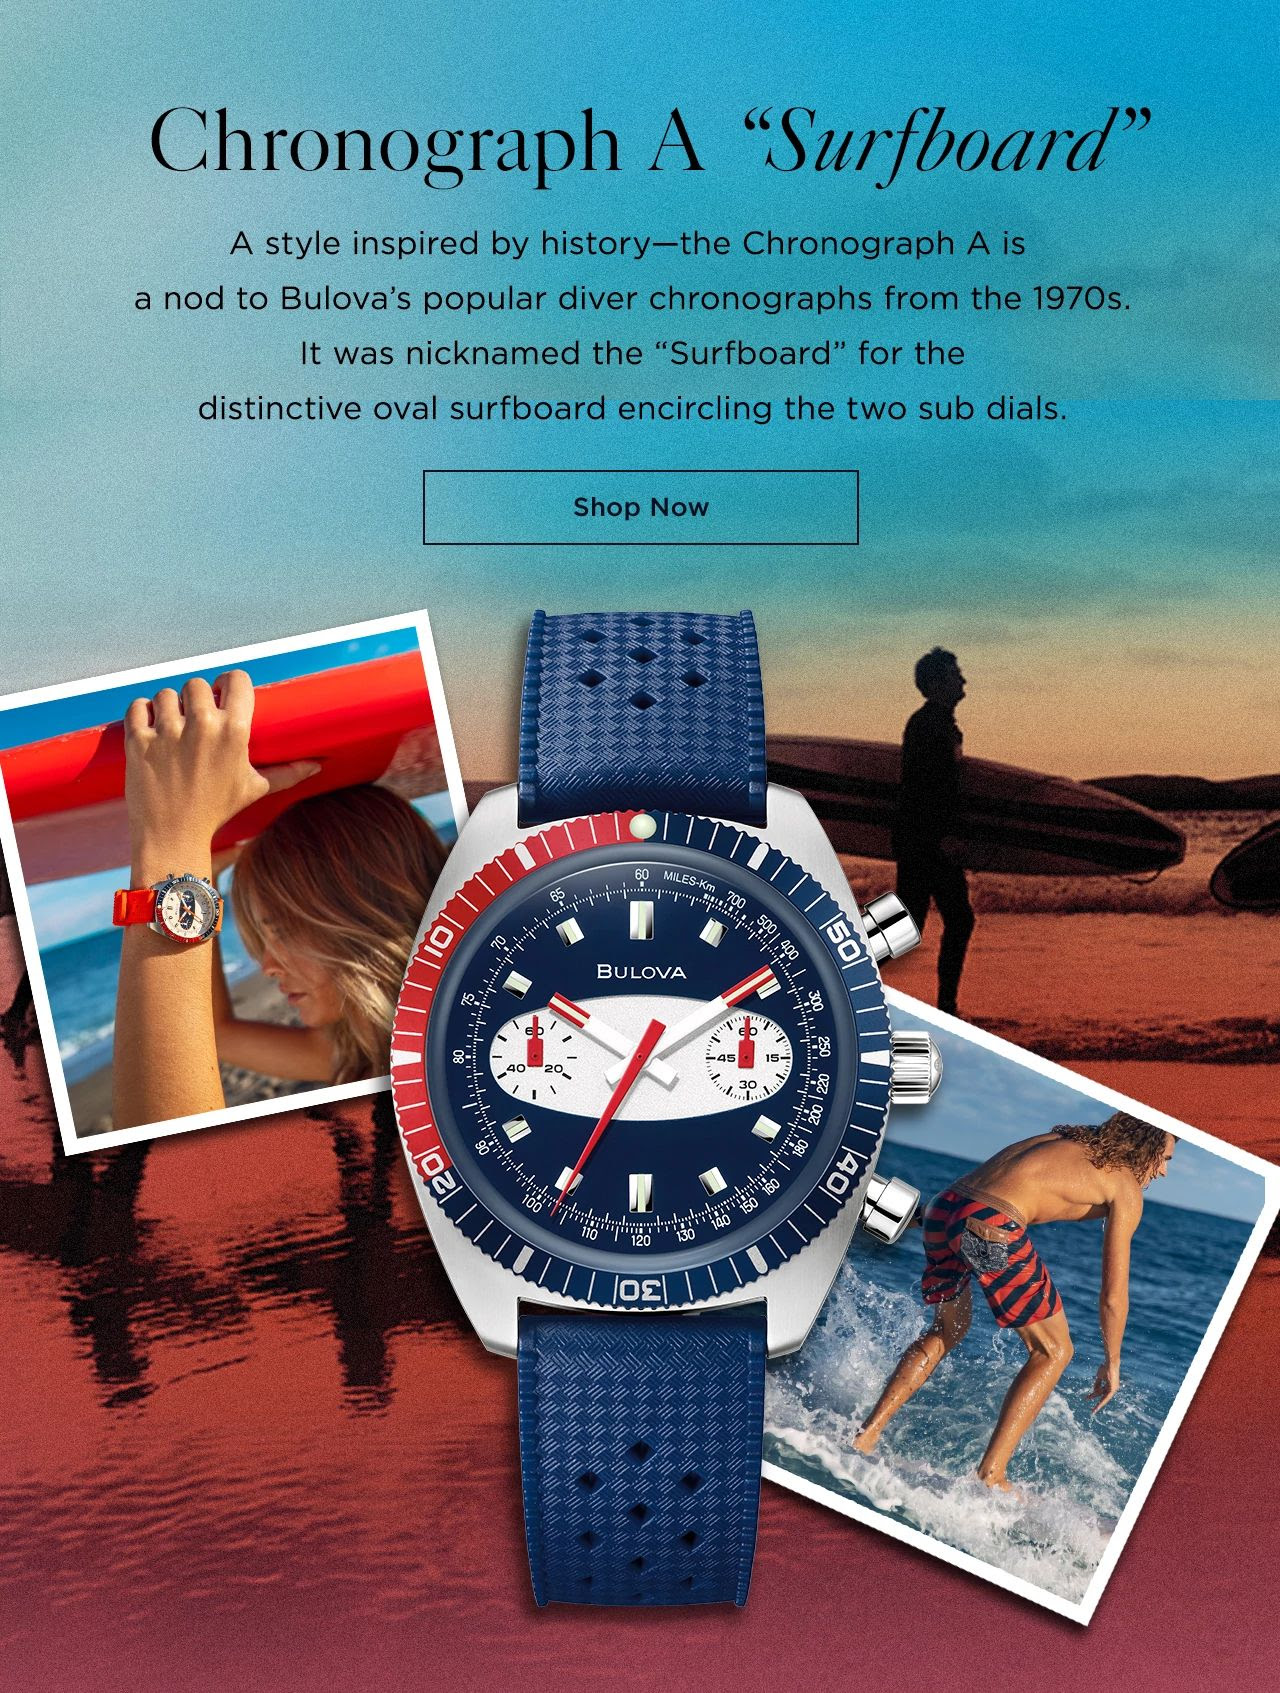 Chronograph A Surfboard: A style inspired by Bulova's popular diver chronographs from the 1970s and nicknamed for the distinctive oval surfboard encircling the two subdials. Shop now